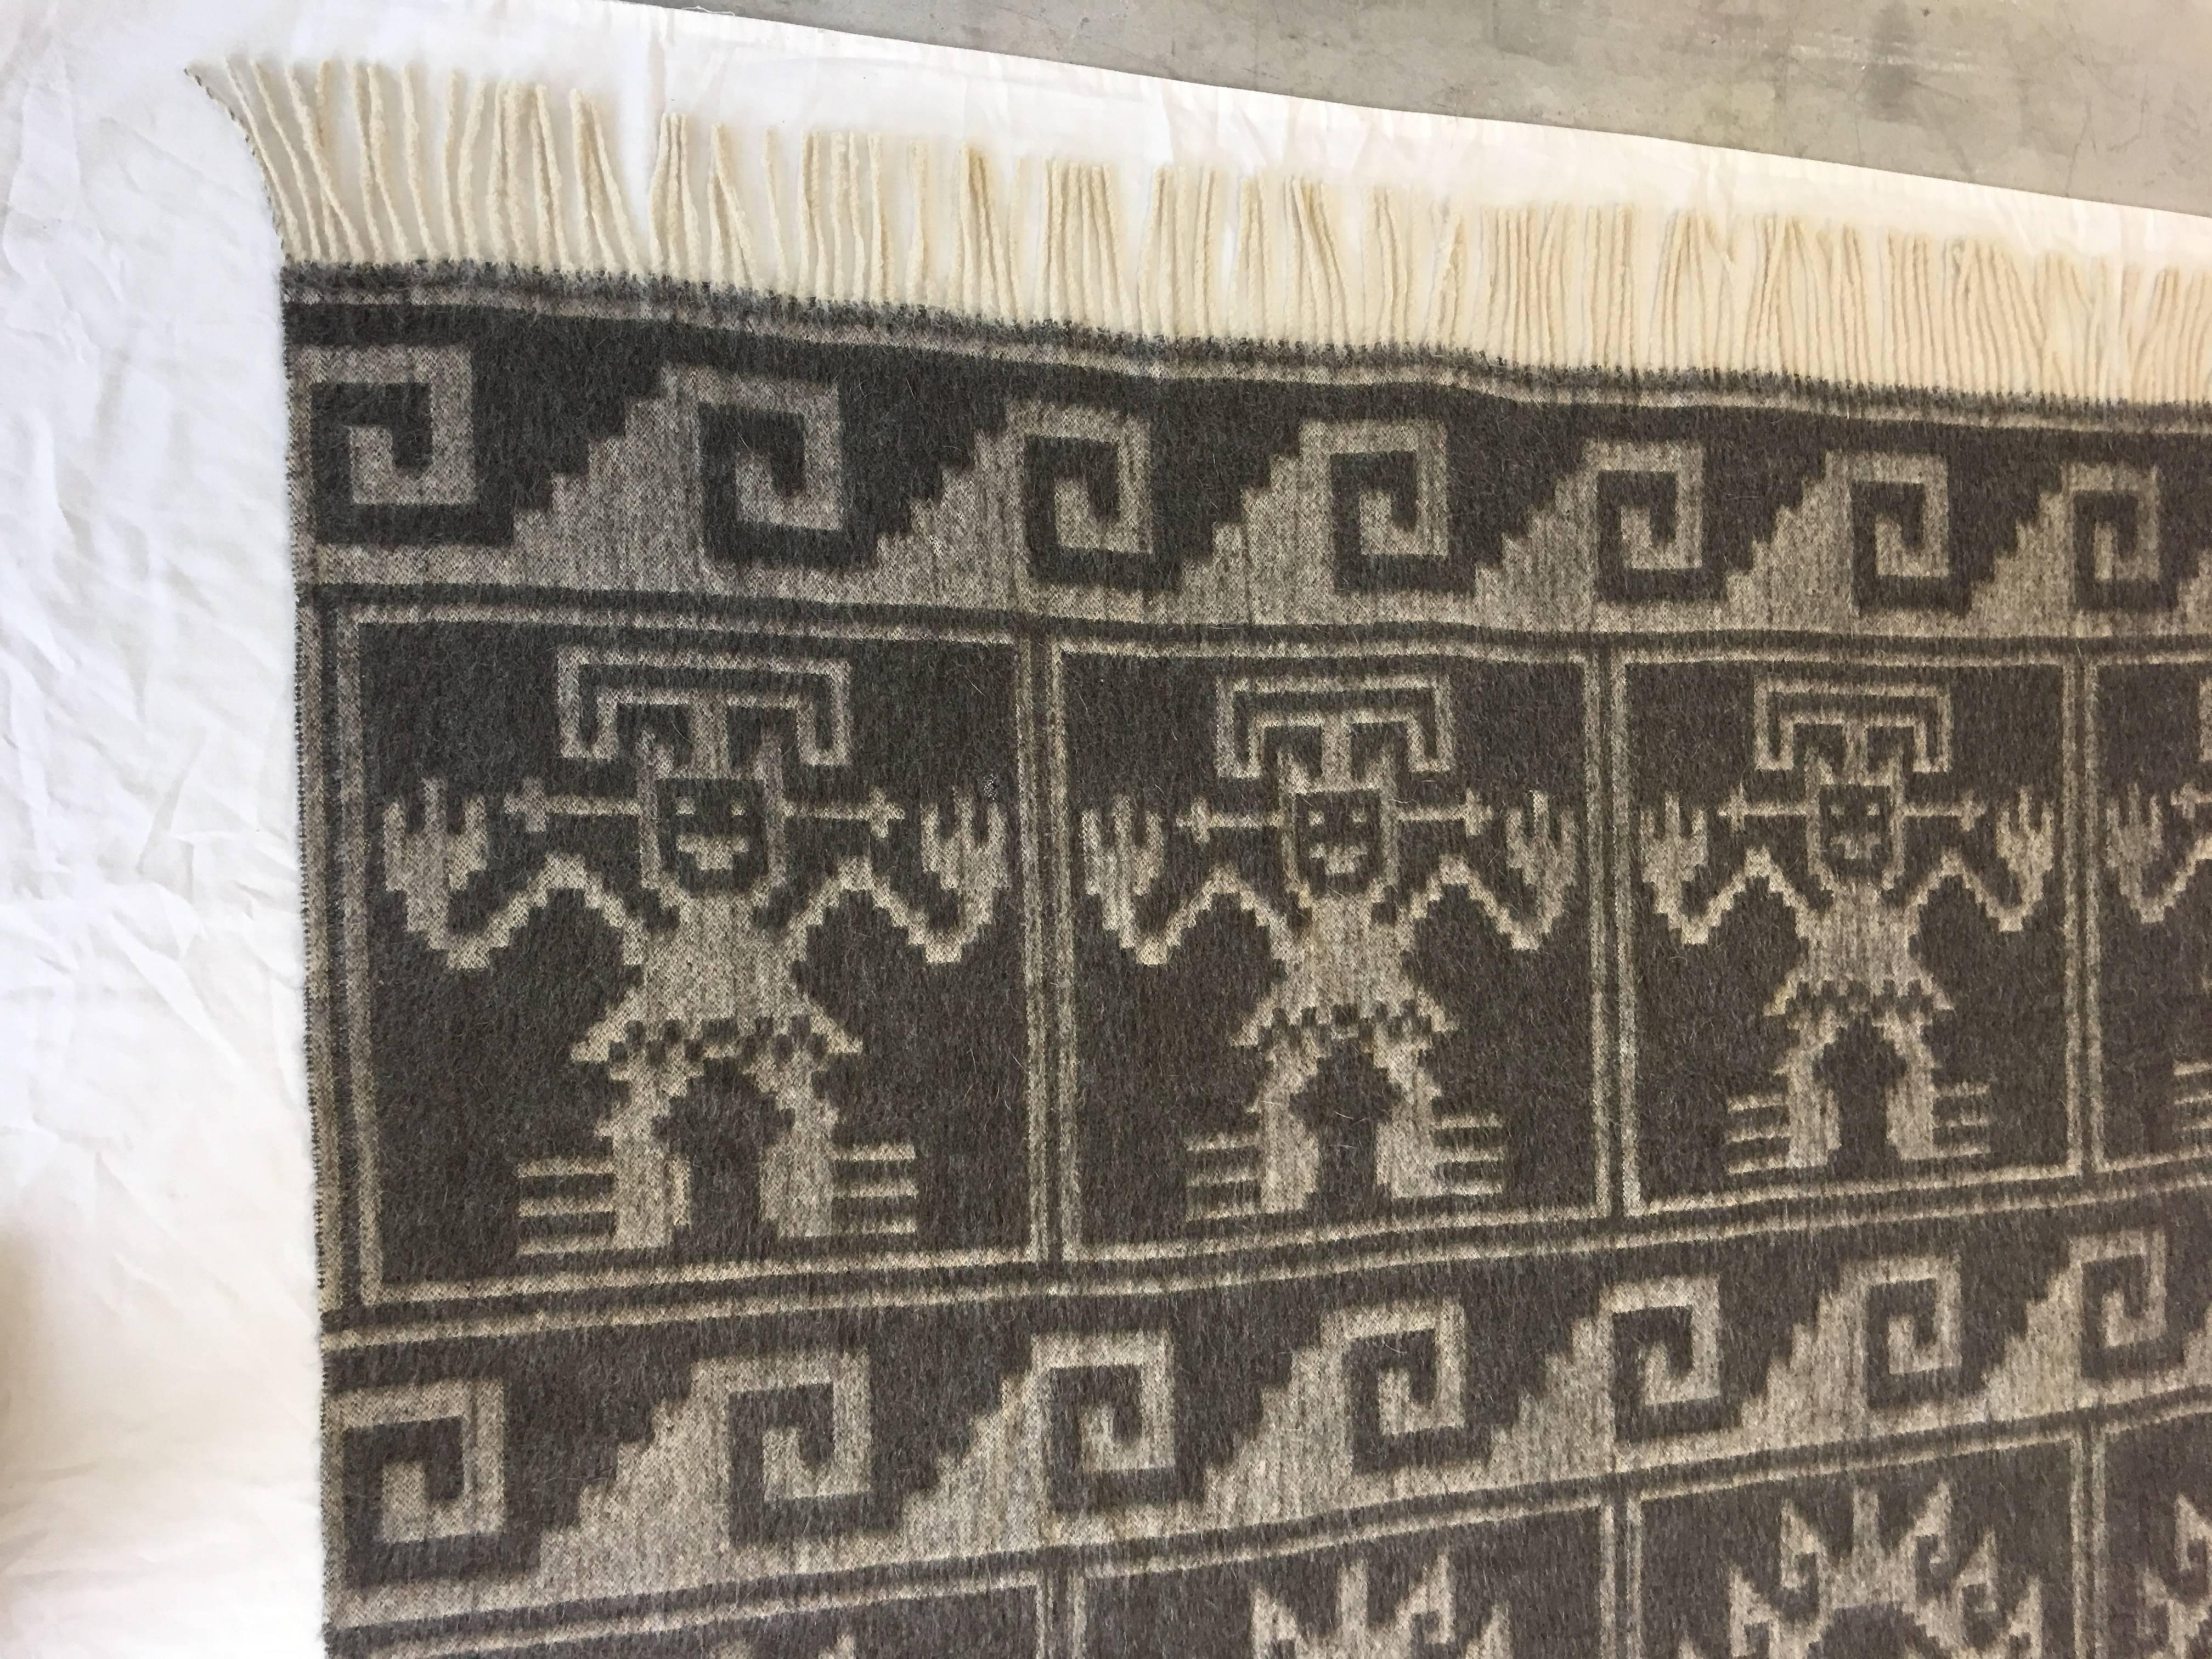 Offered is an absolutely gorgeous, 1950s Mid-Century, gray monochrome throw blanket with an Aztec god and sun design. Made of 100% alpaca wool.